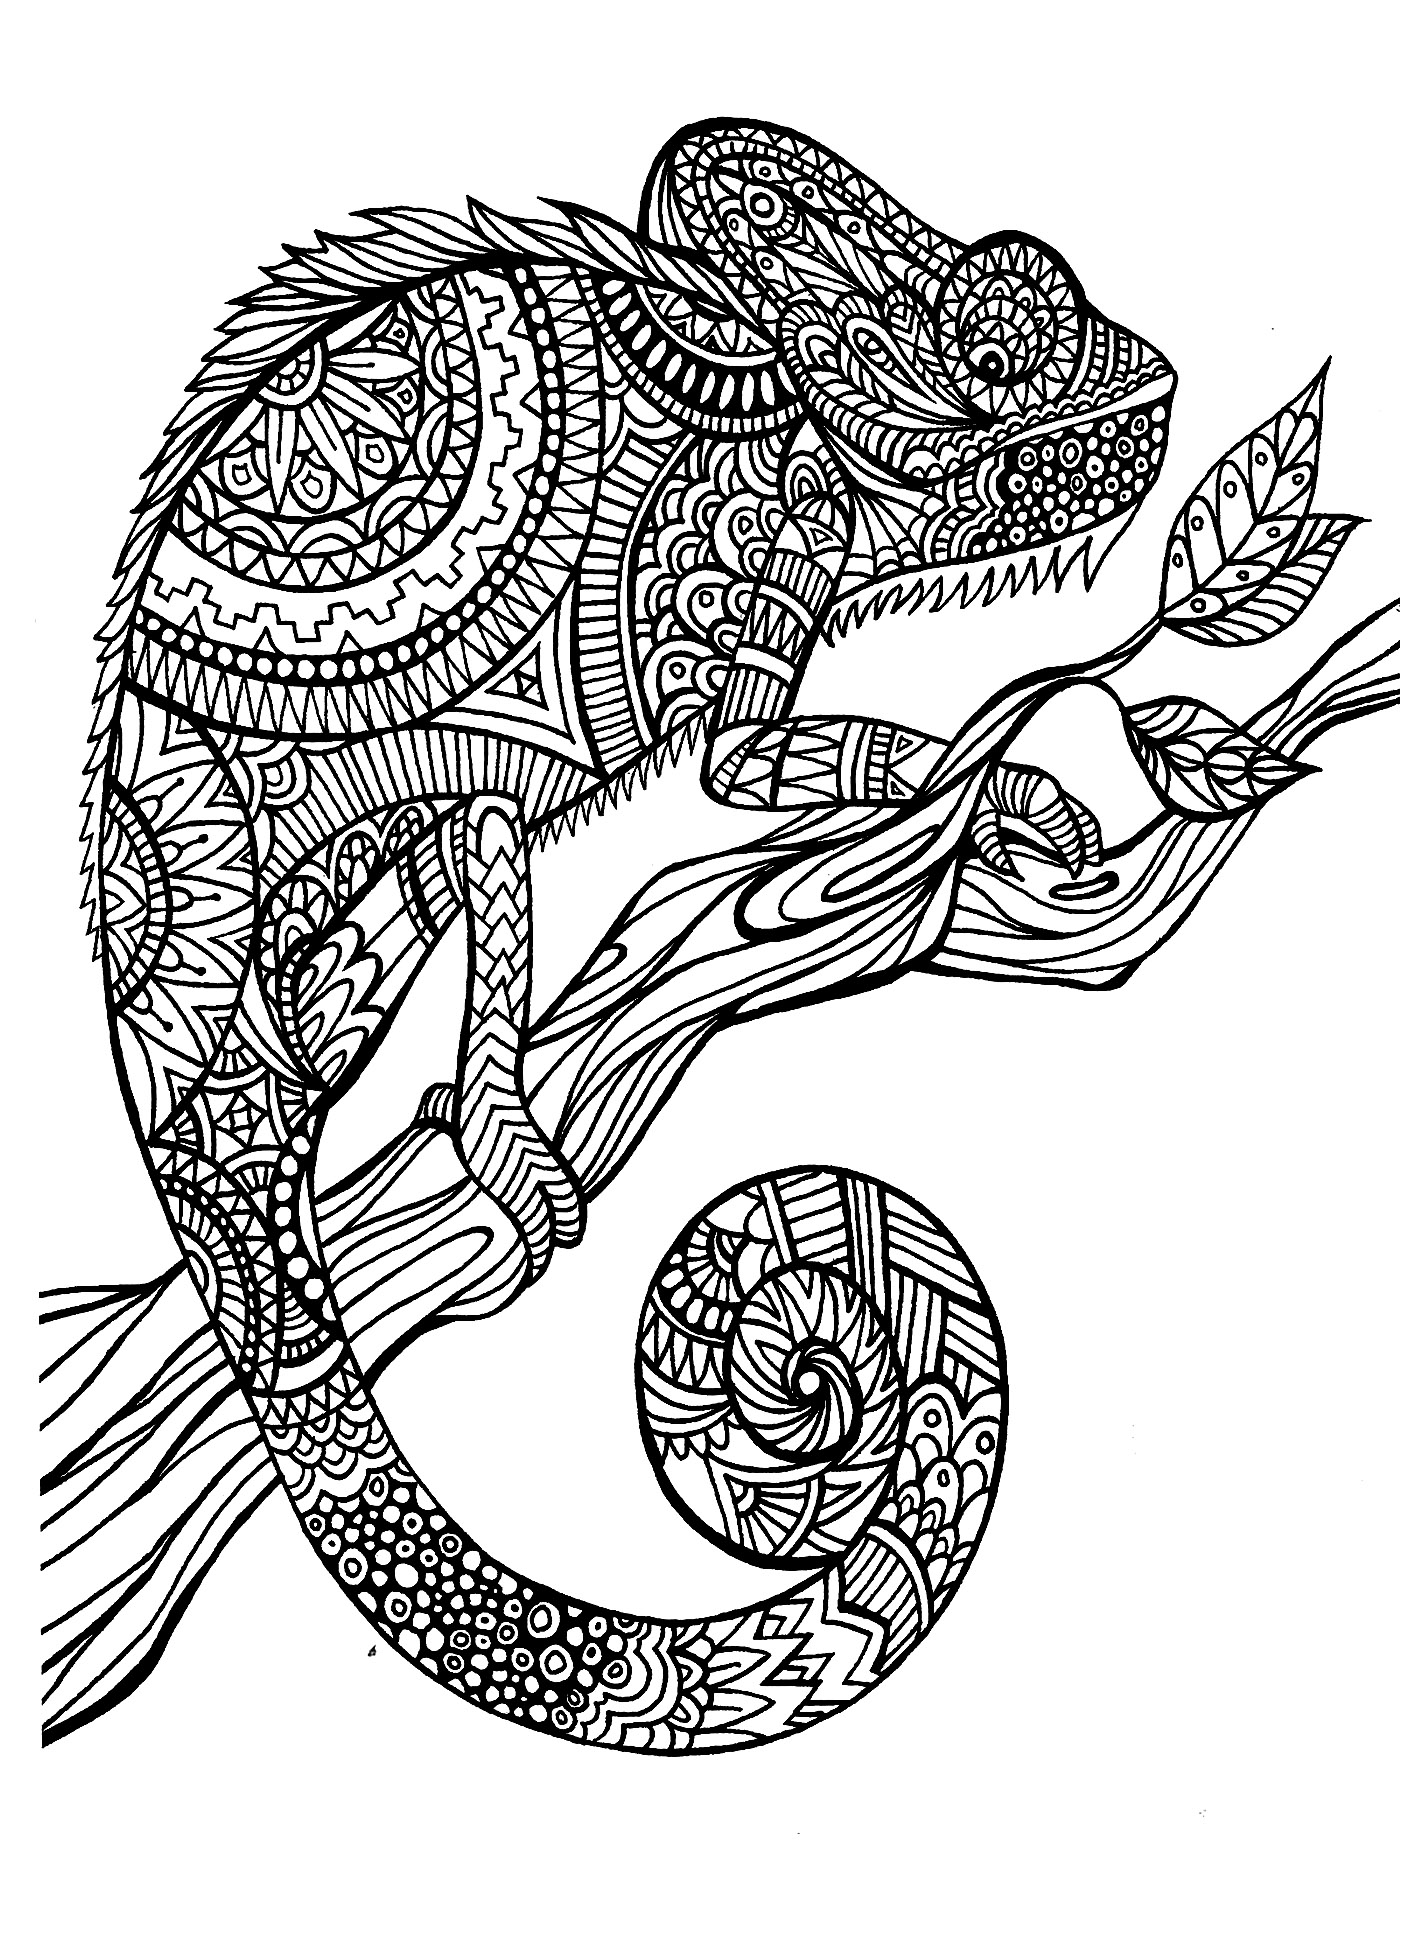 A magnificien cameleon to color, drawn with zentangle patterns